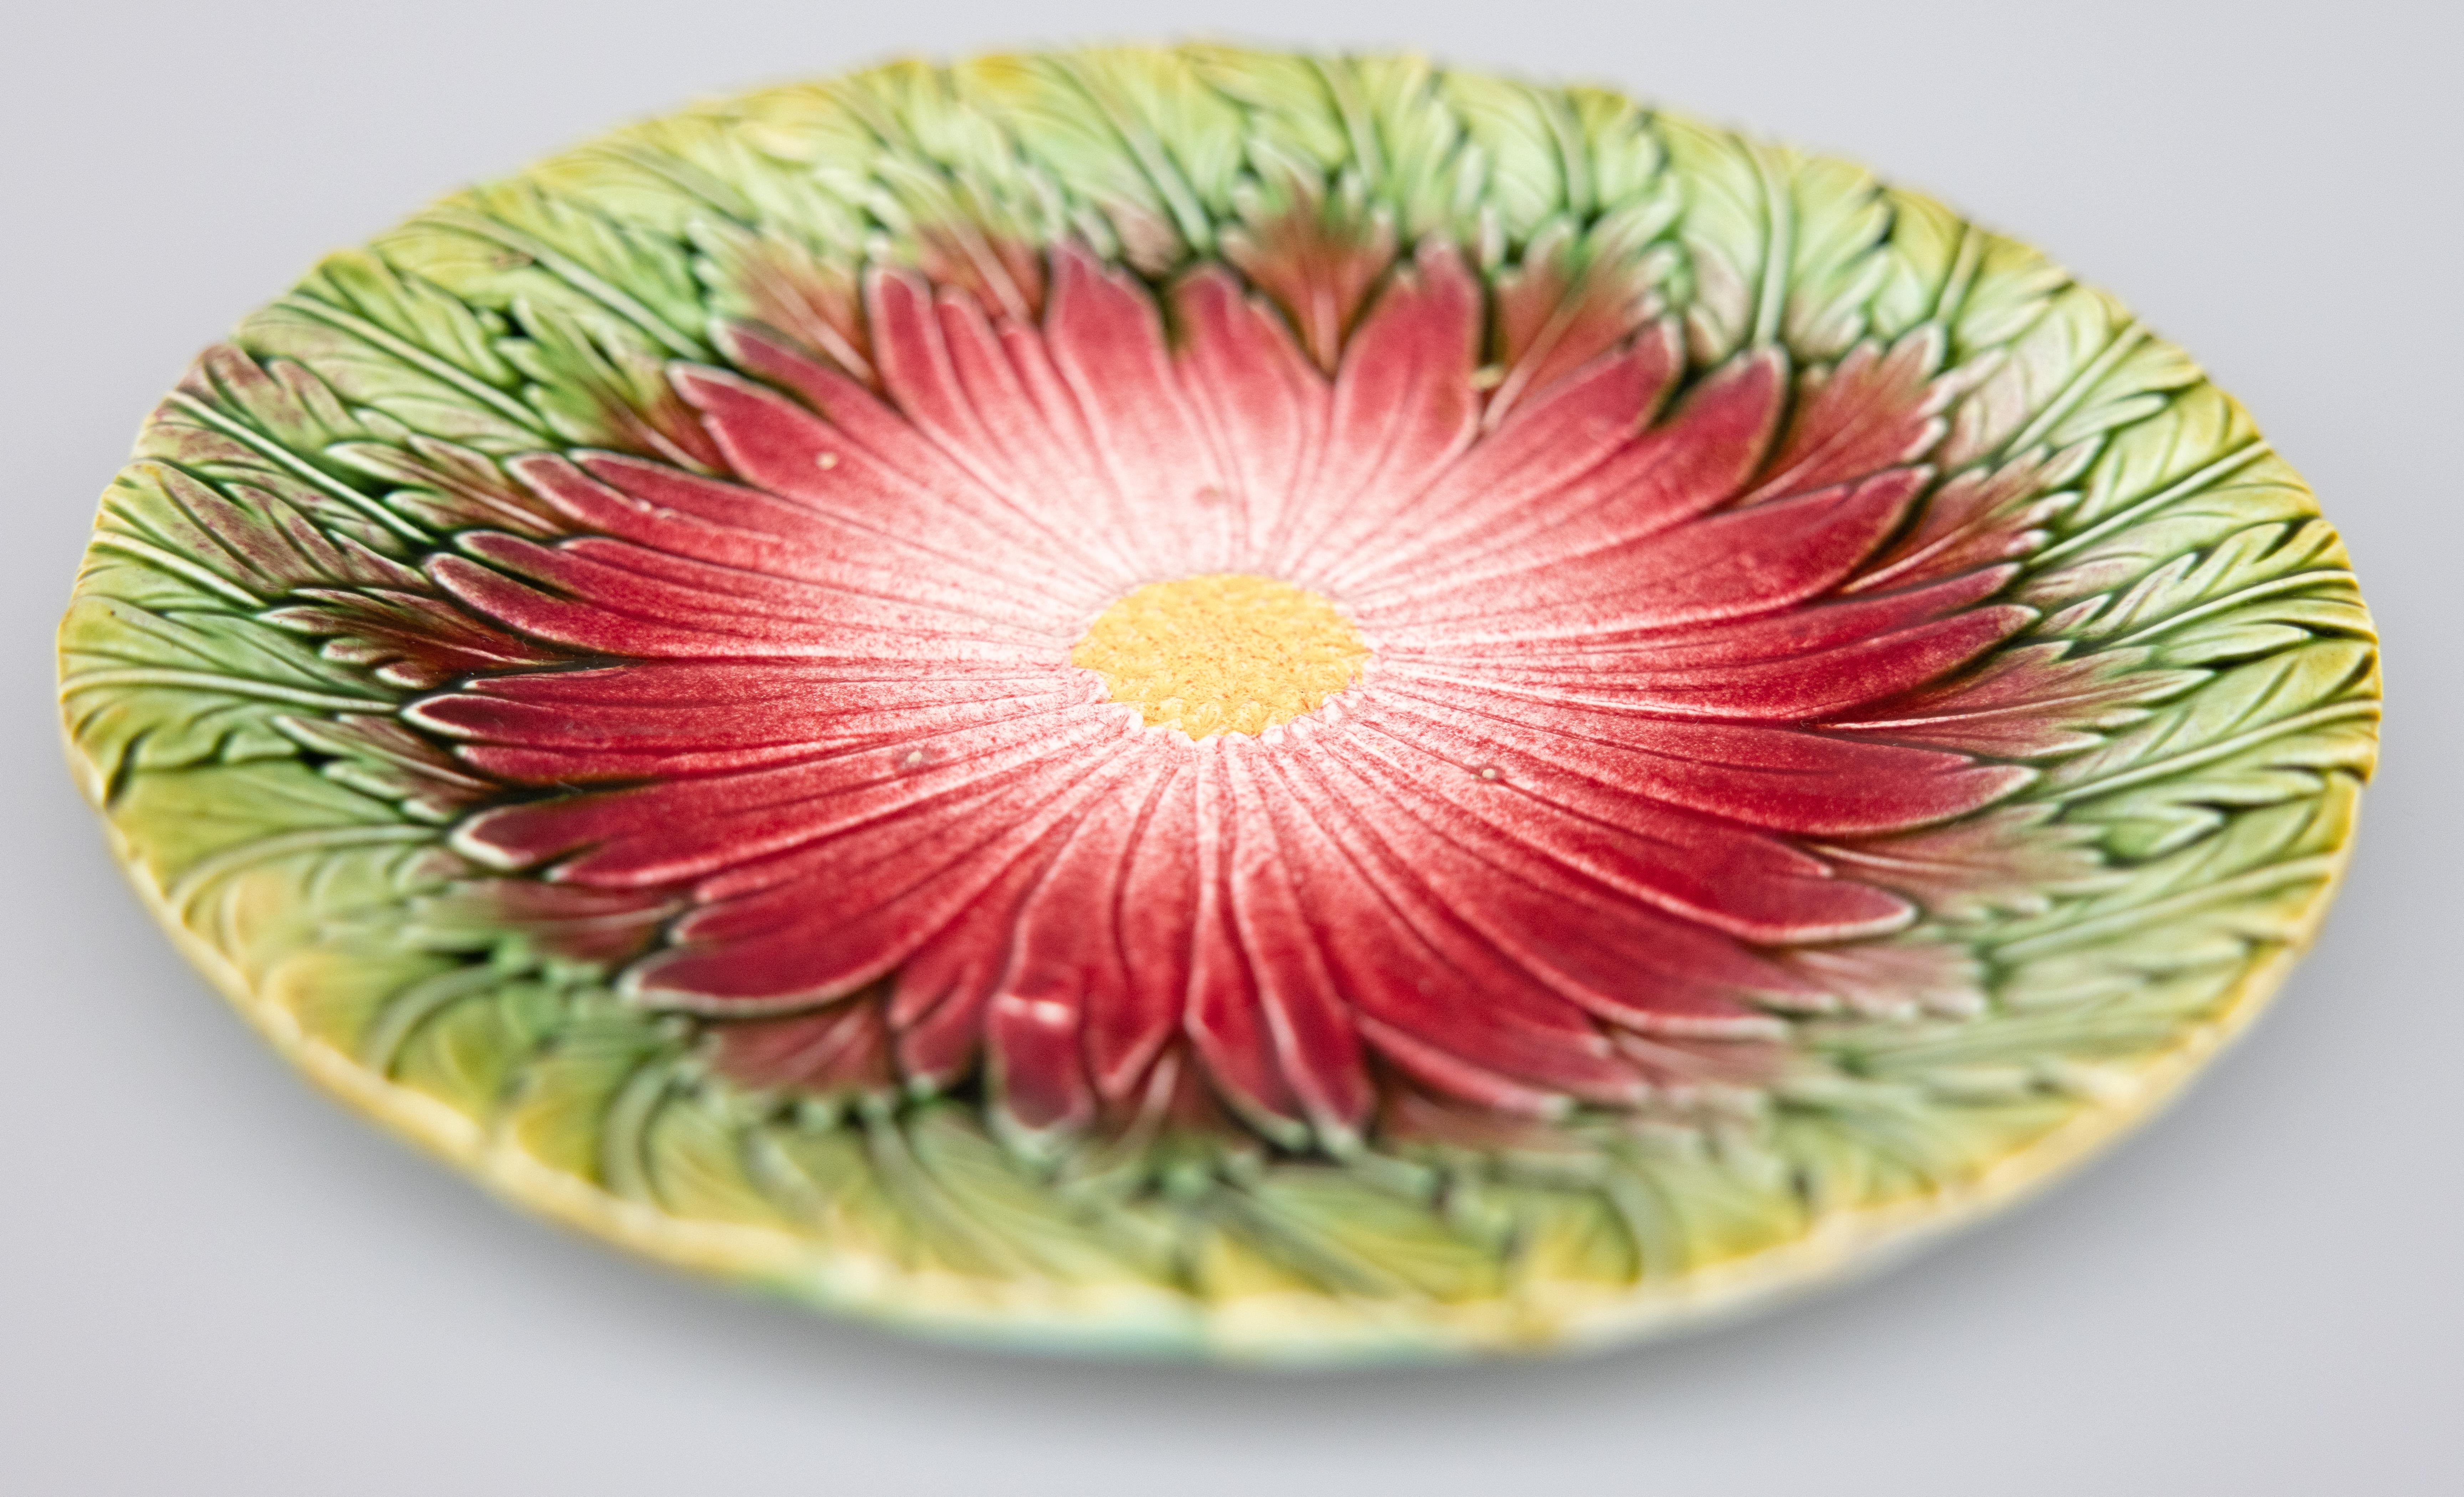 A lovely antique 19th-Century French majolica daisy flower plate, attributed to Orchies, circa 1890. Unmarked. This gorgeous plate has a hand painted dark pink / rhubarb / cranberry daisy on a green leaf background. It would be lovely added to a